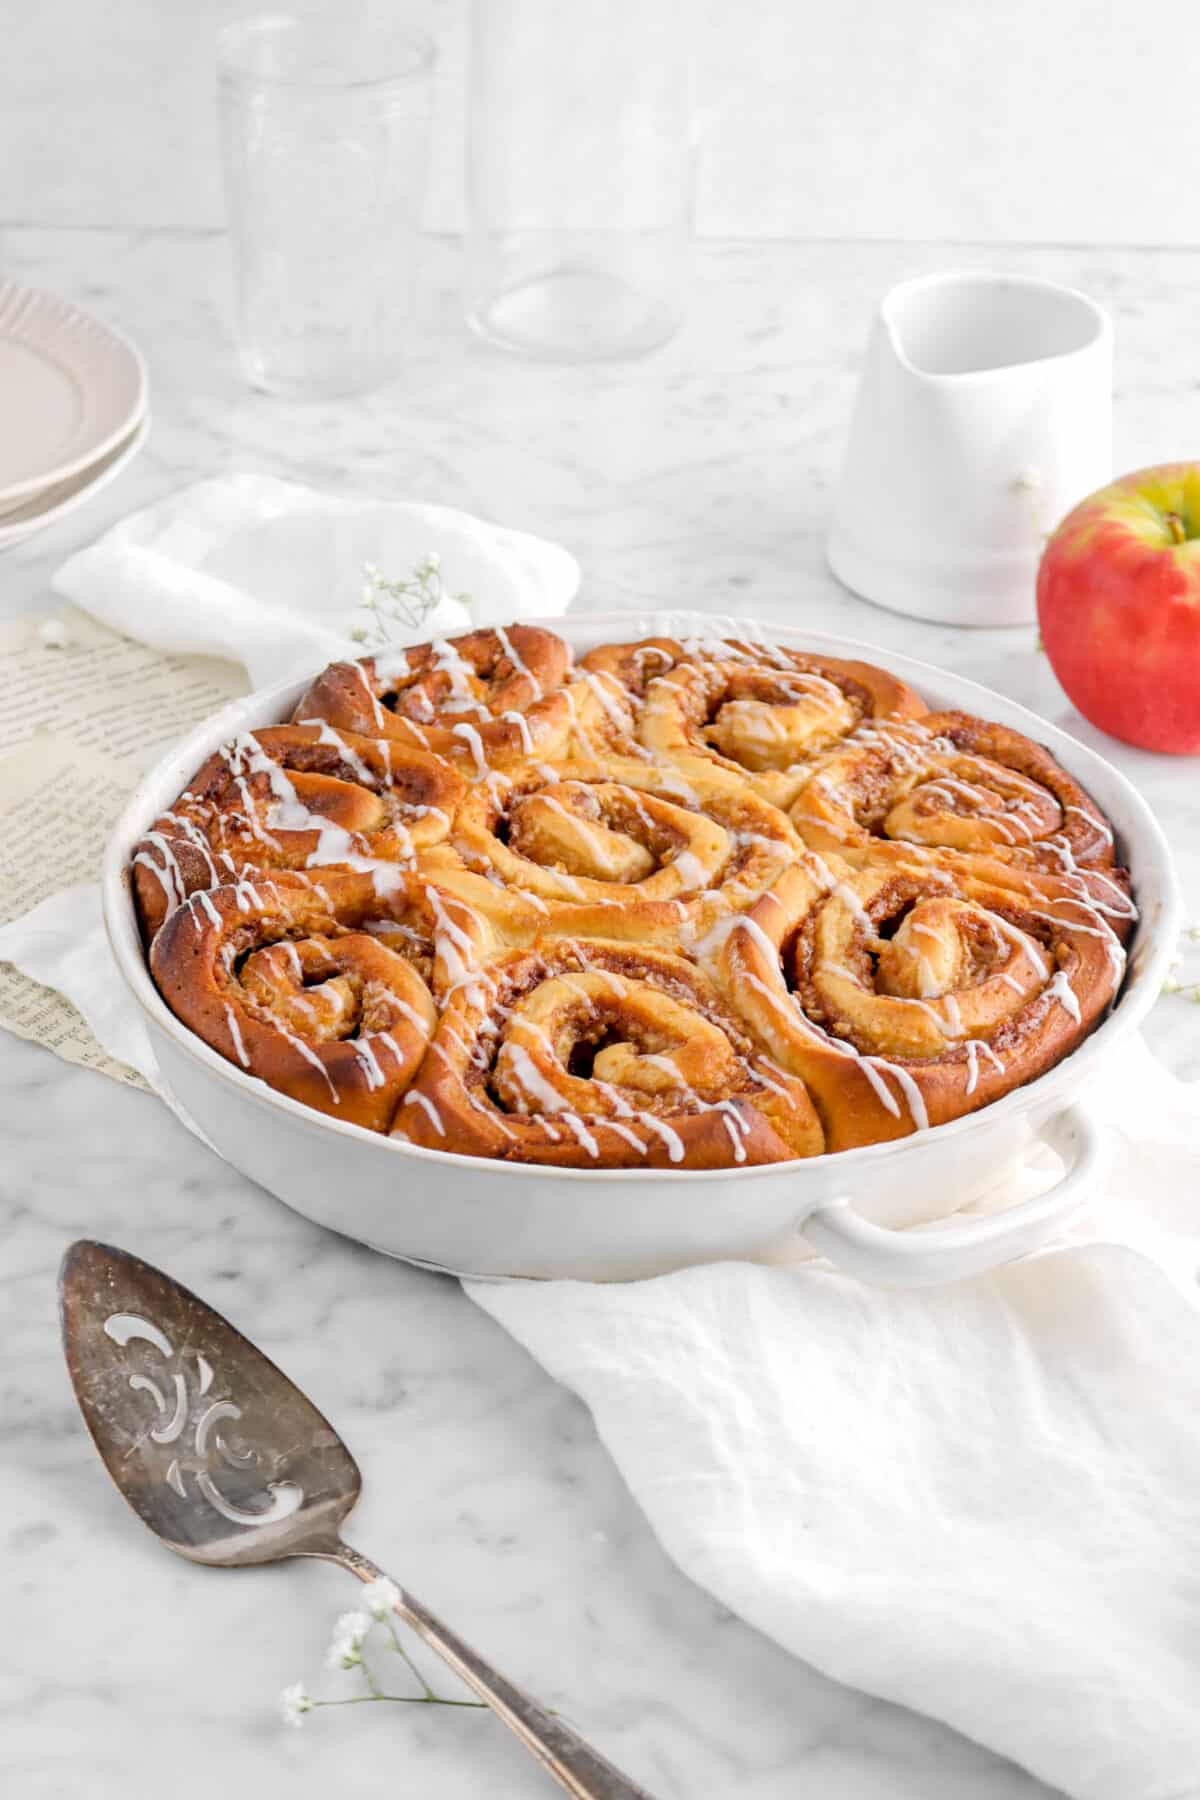 eight apple pie cinnamon rolls in white baking dish with cake knife on white napkin with apple, two glasses behind, and two paltes